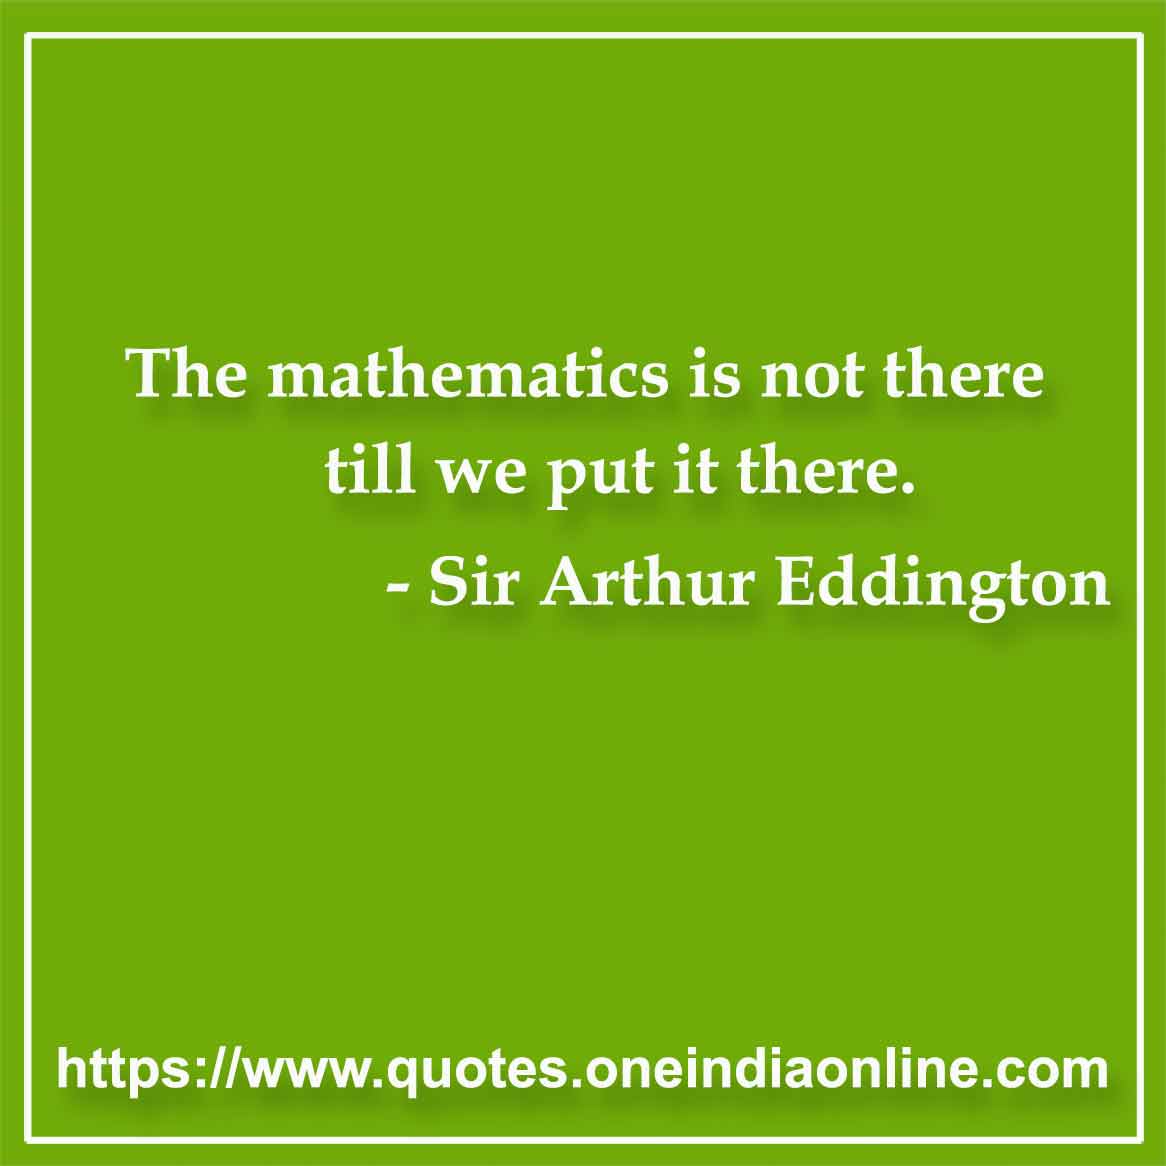 The mathematics is not there till we put it there.

Mathematics Quotes by Sir Arthur Eddington